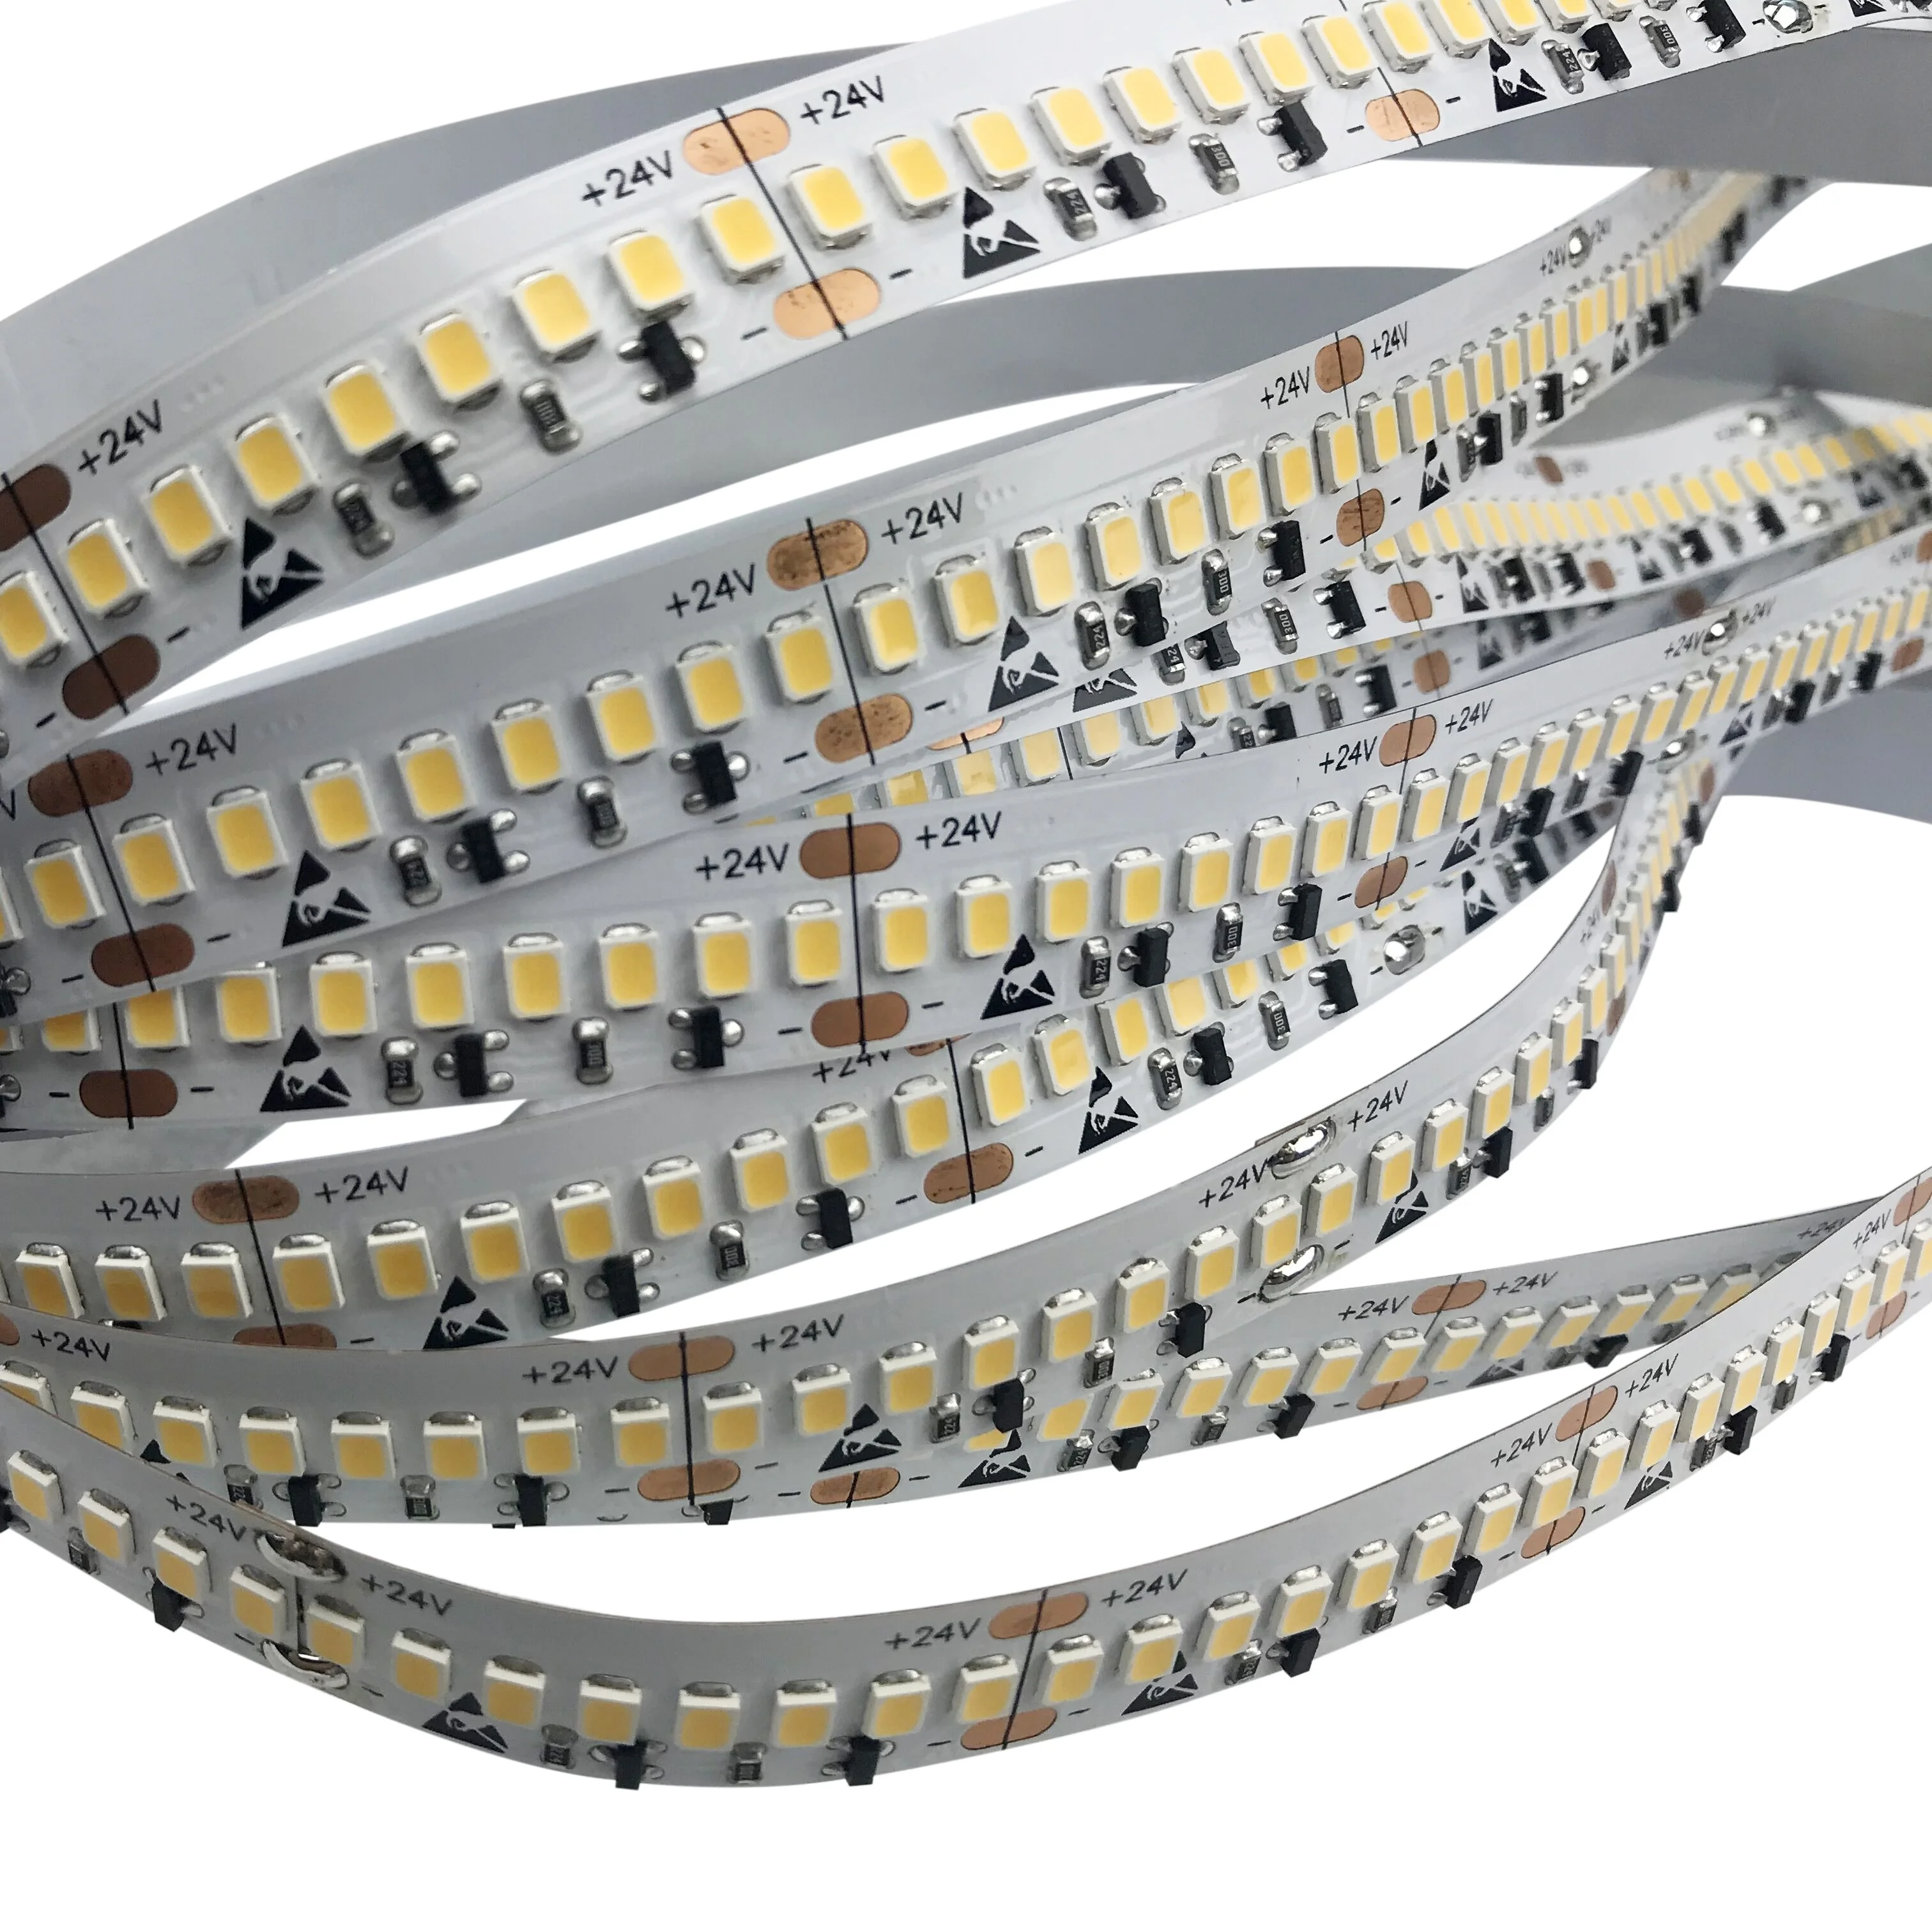 High cri90  SMD2835 high light efficiency 150Lm/W high density  flexible Led strip lights with  Cost-effective High Quality Led